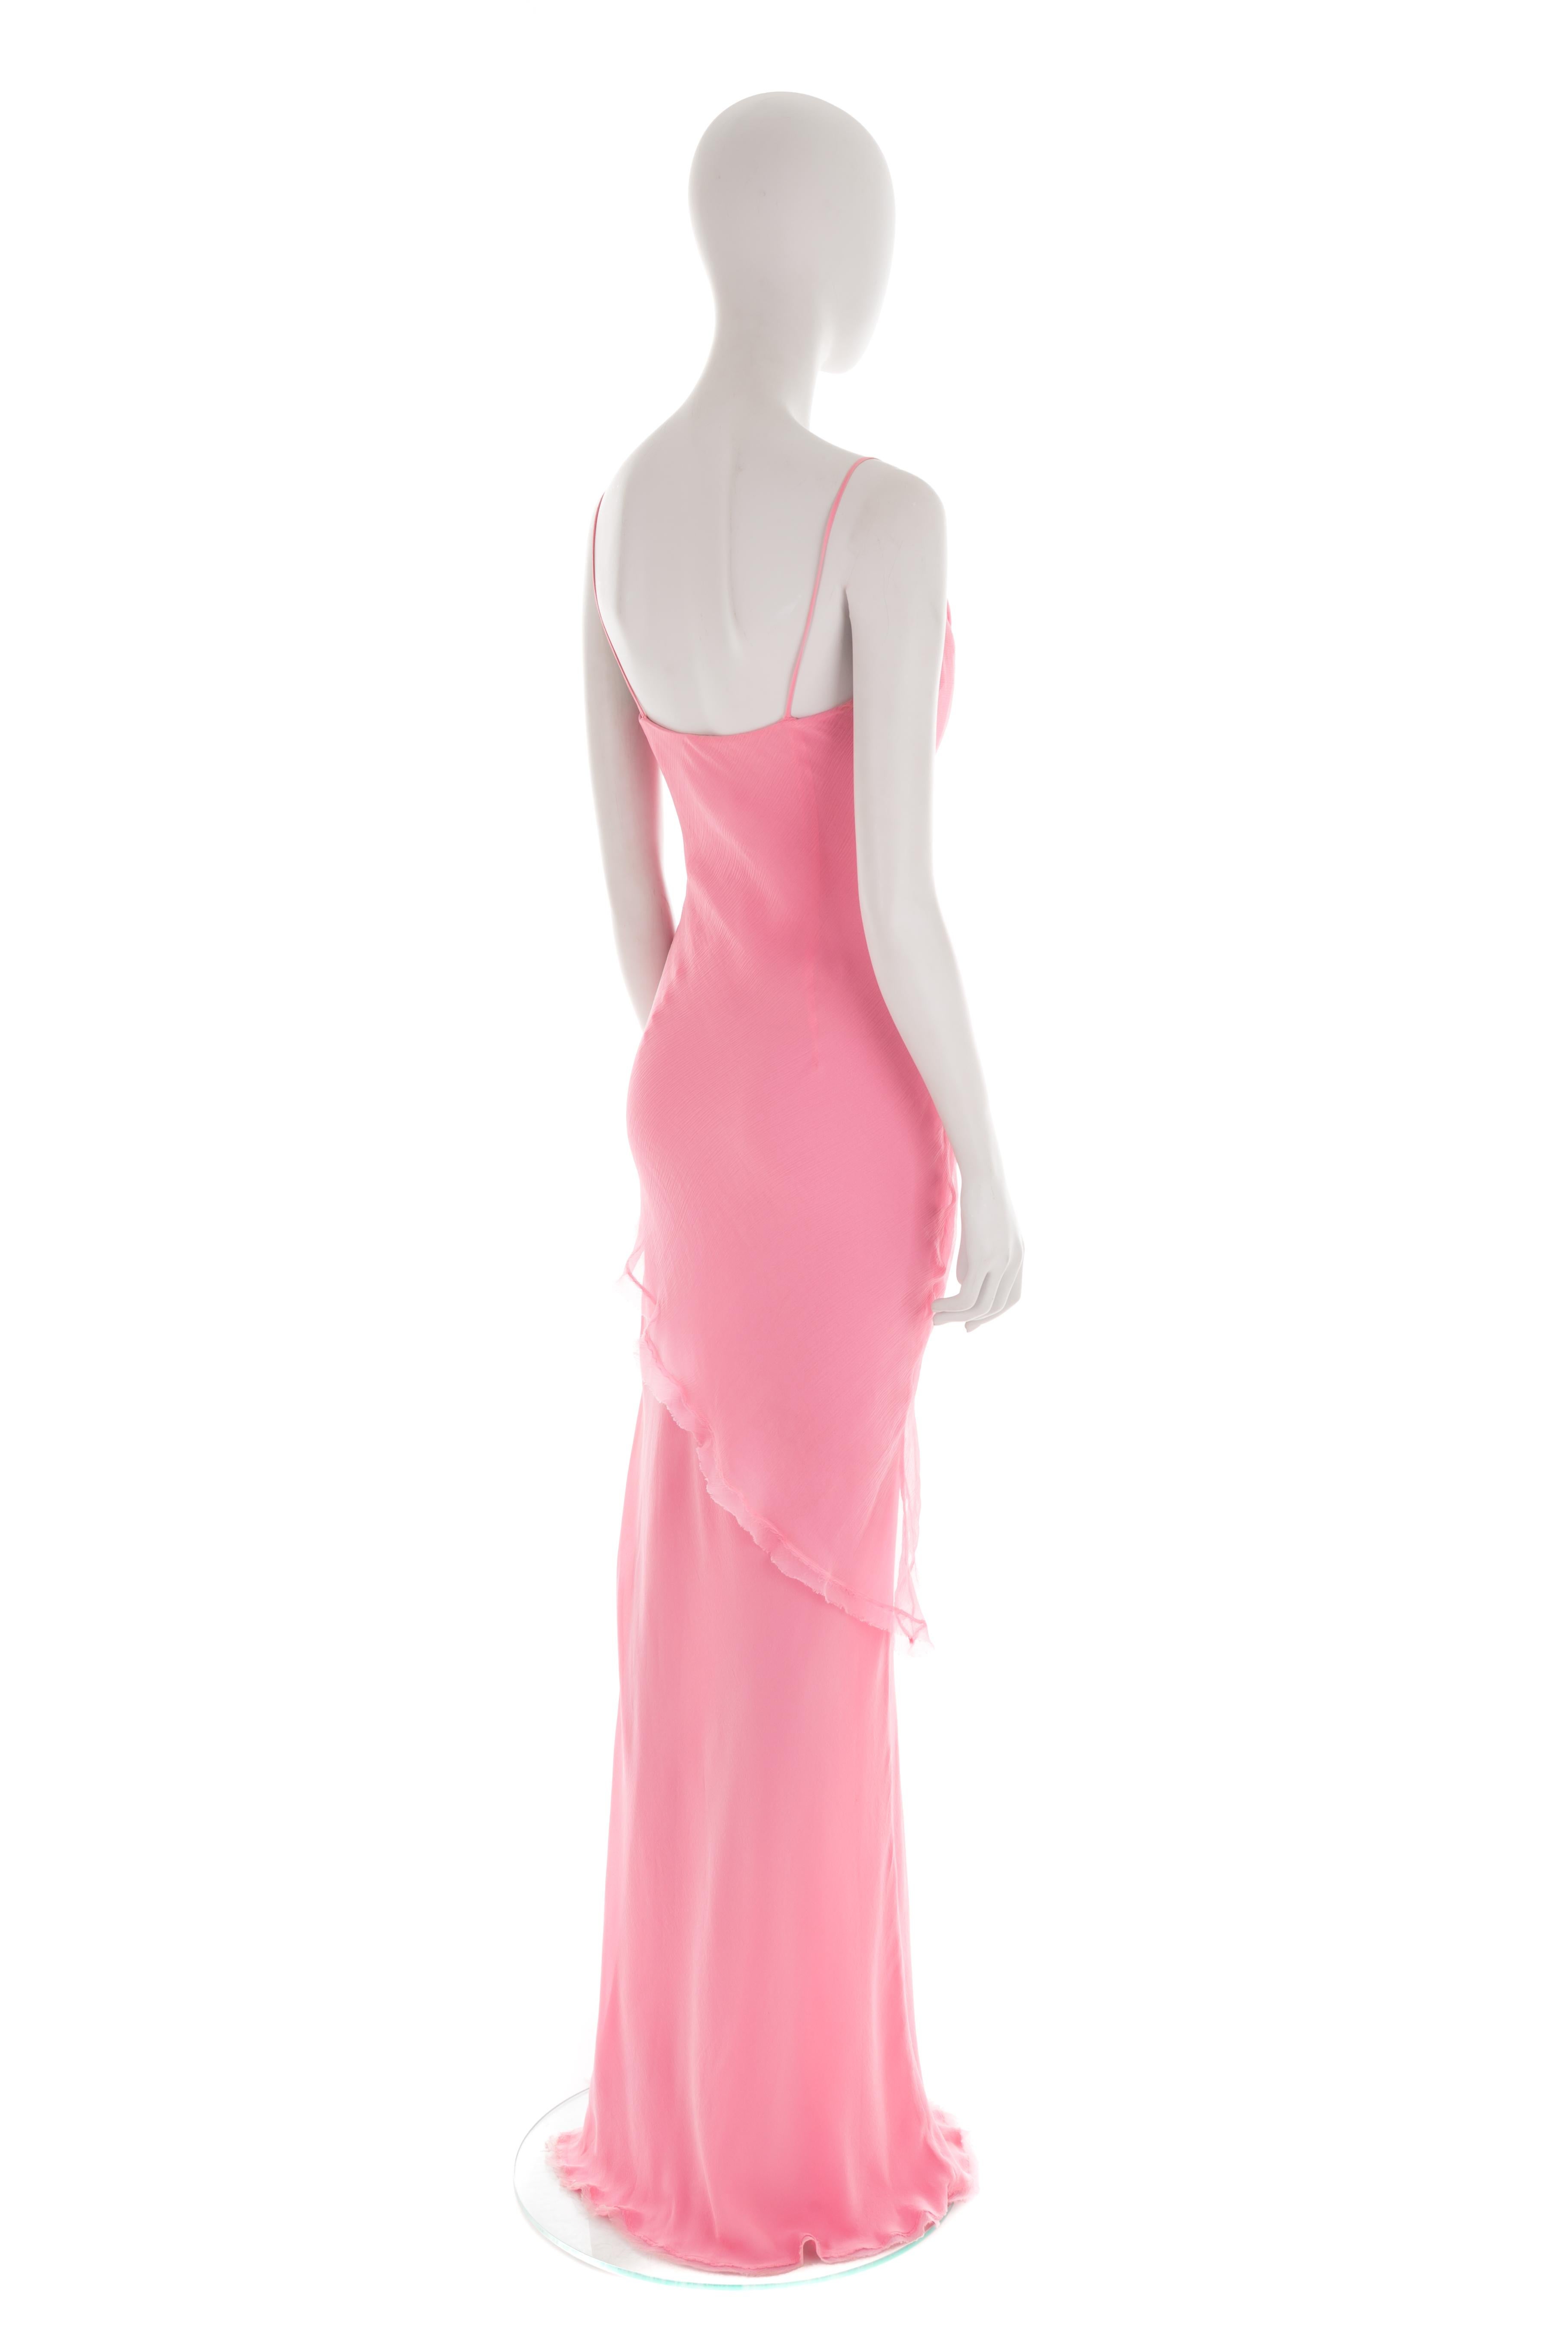 Ermanno Scervino S/S 2004 multi-layered pink chiffon gown with side slit For Sale 3